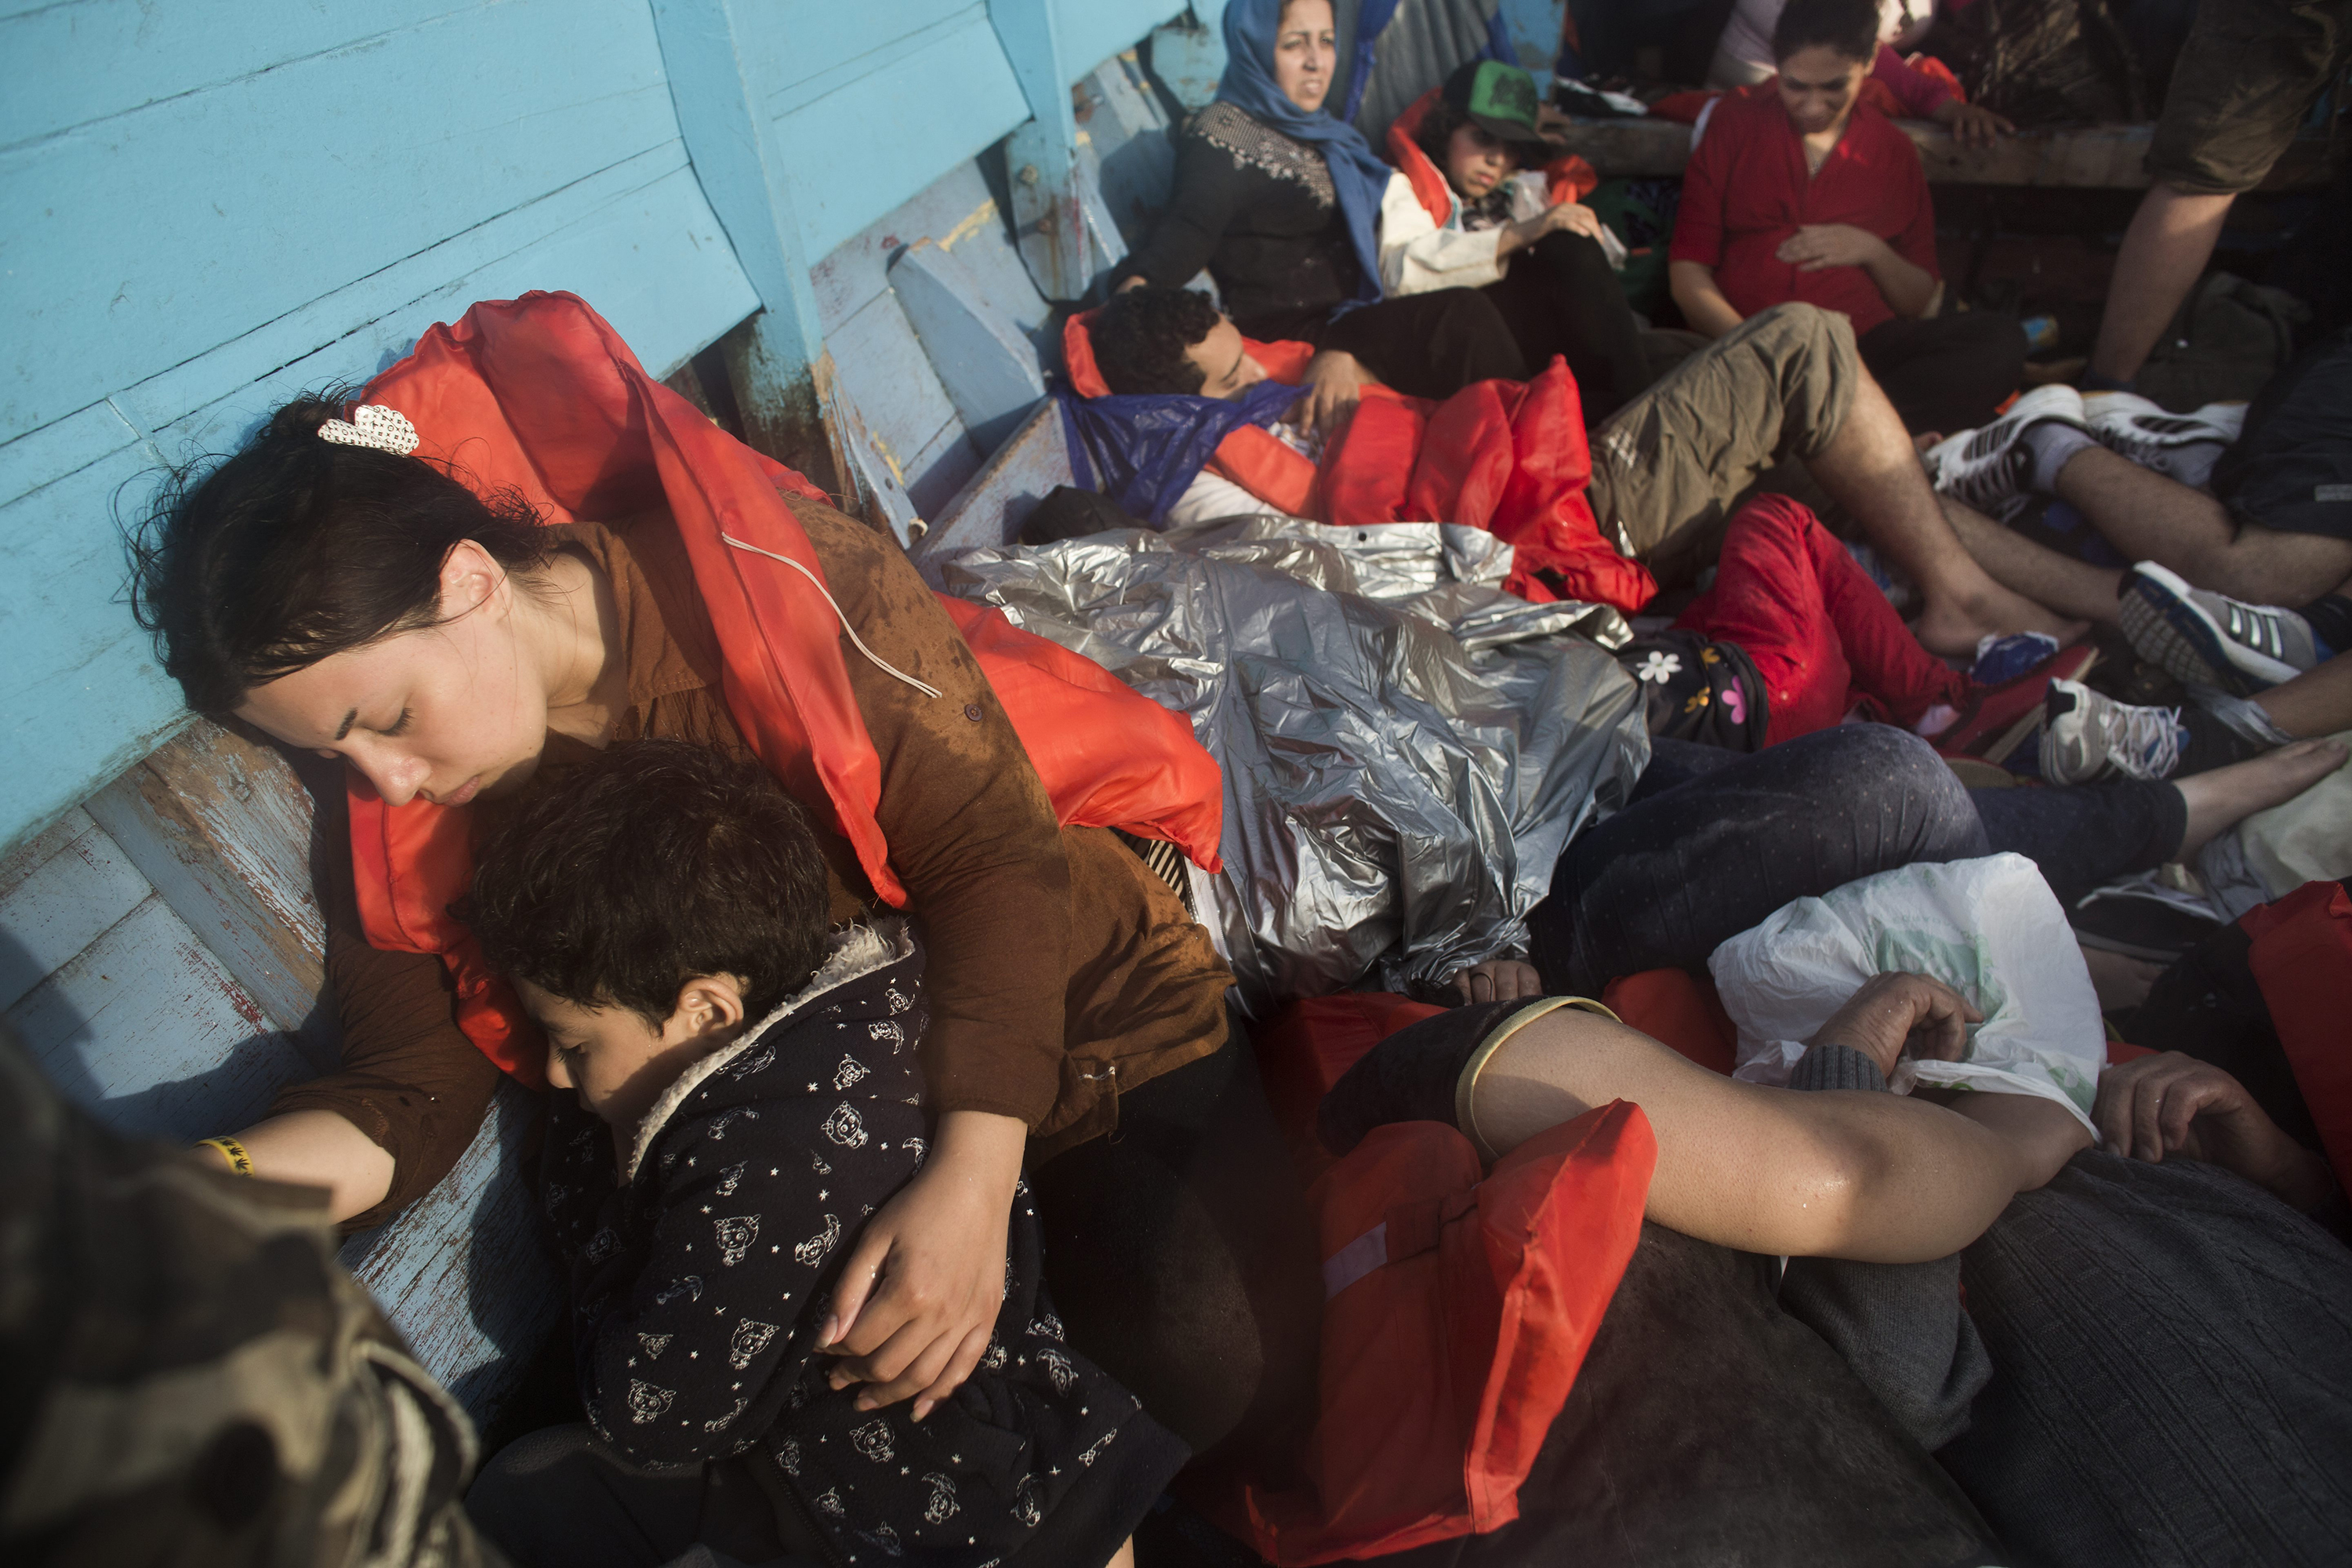 A group of asylum seekers—all Iranian except for one Afghan—en route by boat from Indonesia to Australia on Sept. 7, 2013. (Joël van Houdt—Hollandse Hoogte/REDUX)